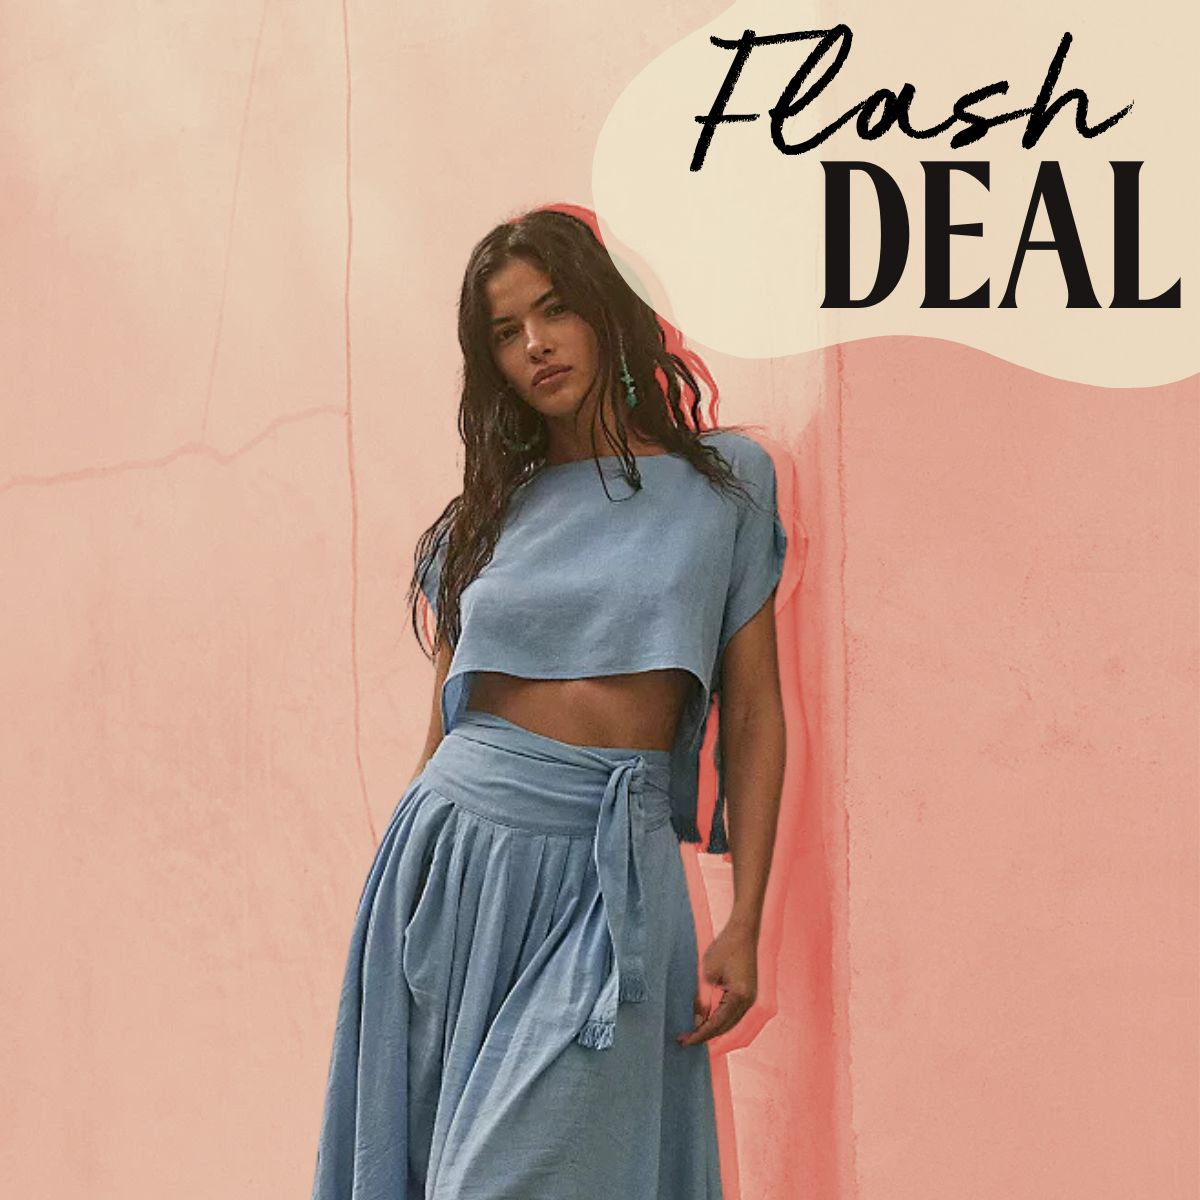 Free People sale: Save up to 70% right now on dresses, tops and more